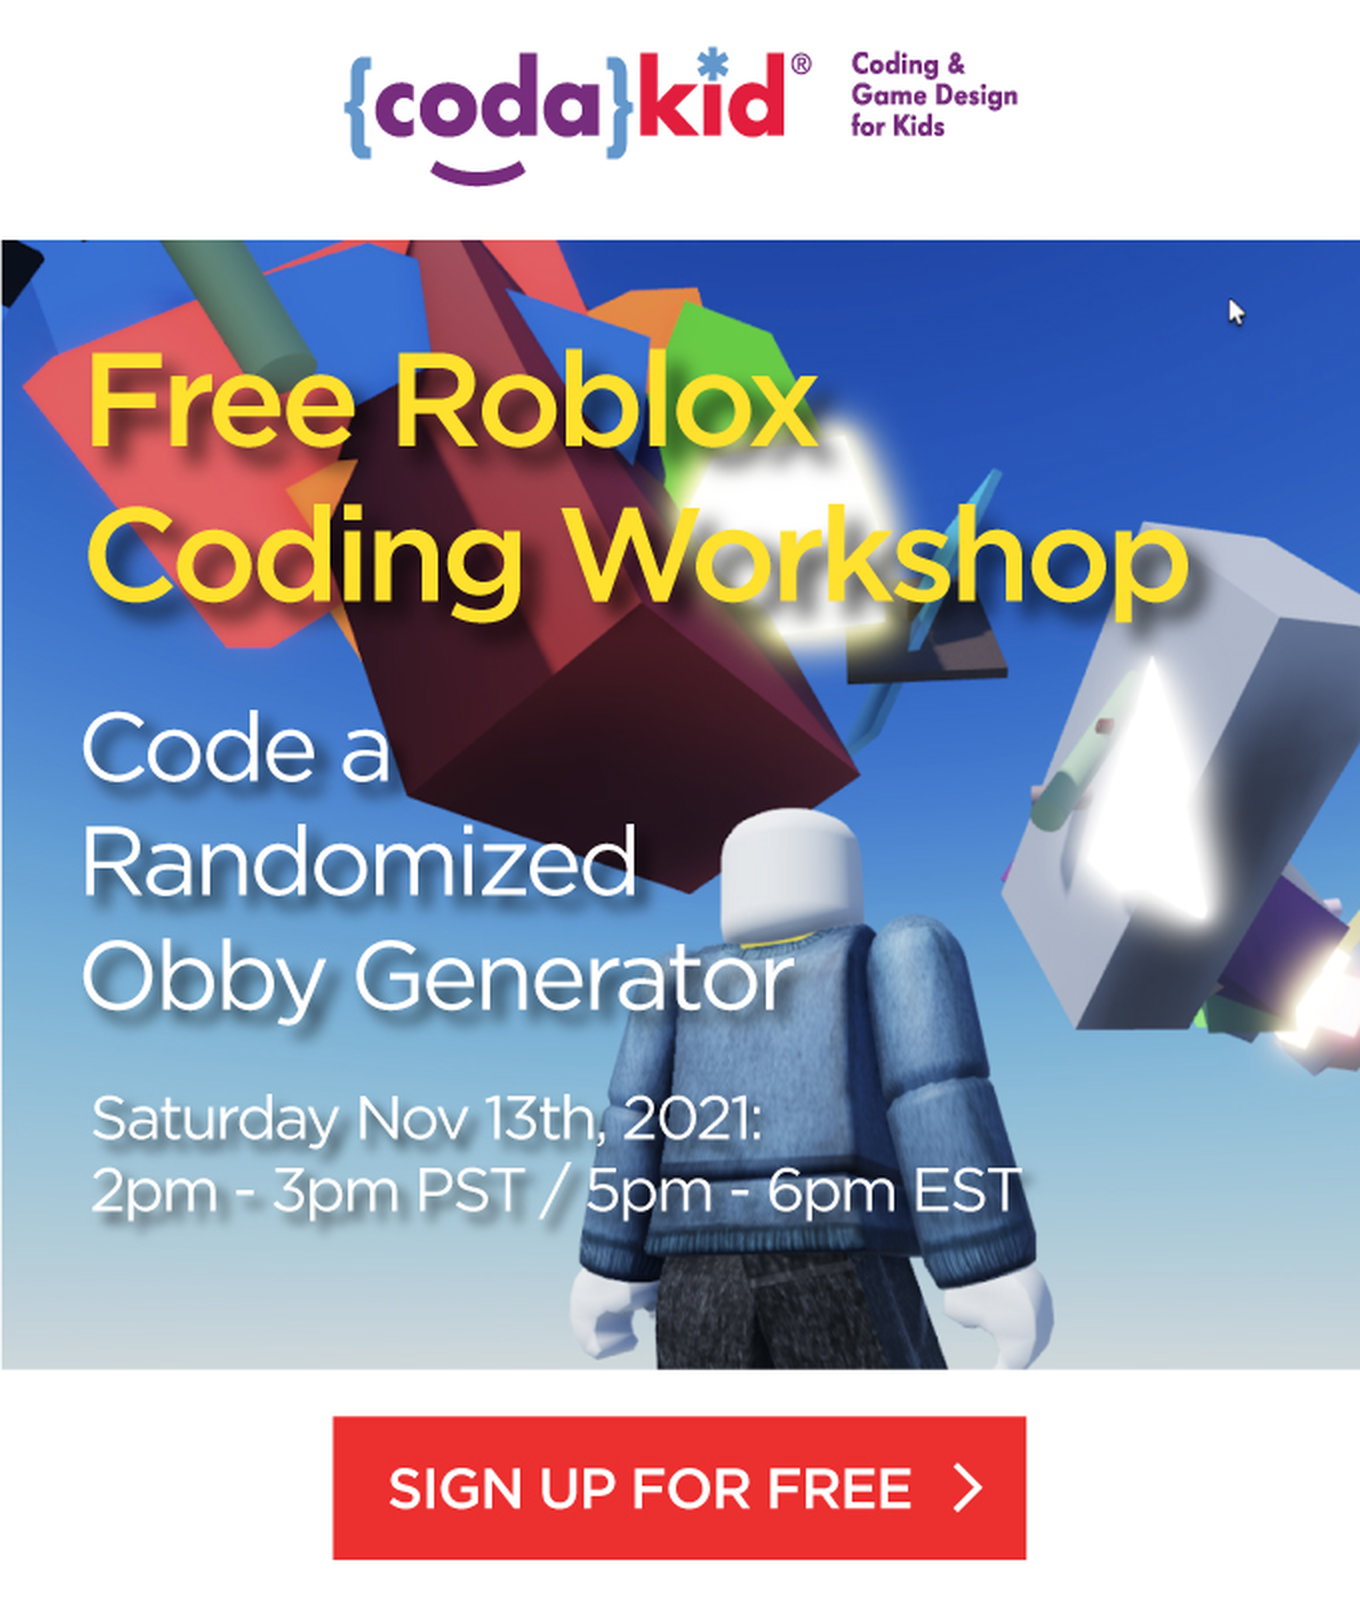 2023 Roblox clicker codes scratch by and 